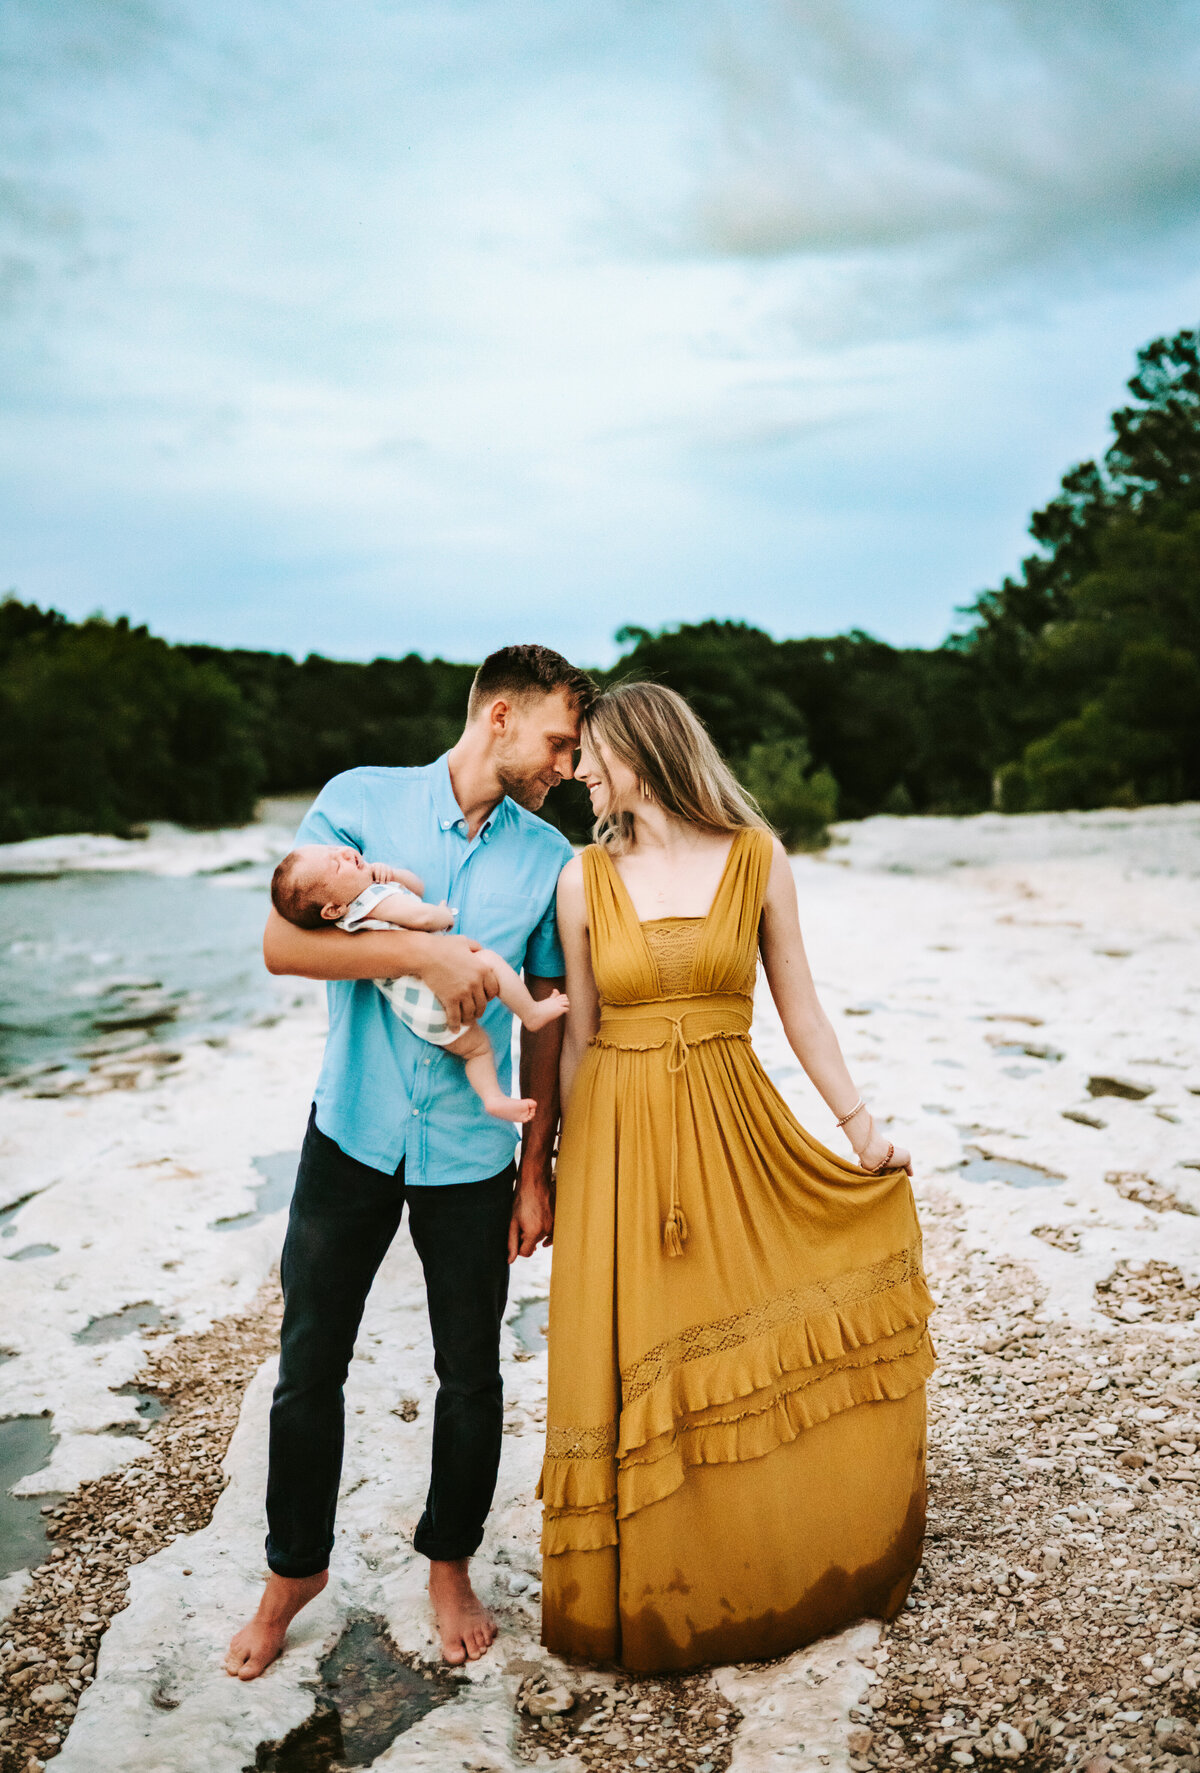 Family Photographer, husband and wife walk on a beach with their newborn child